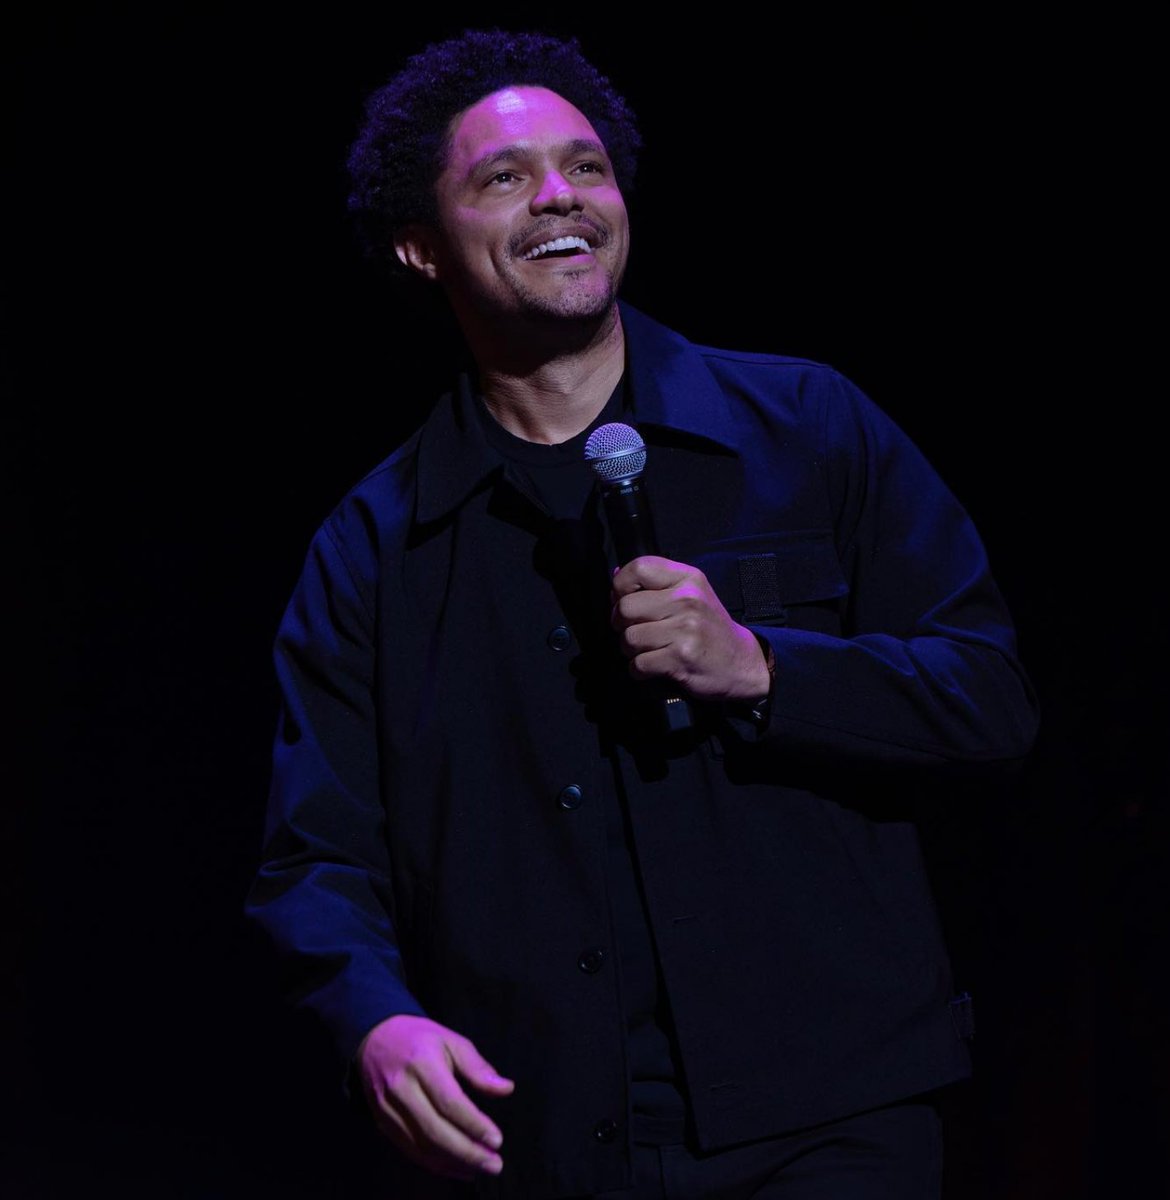 🎤 APRIL 26-27: Trevor Noah at @ficaspokane!⁠ ⁠ Late night host, author, comedian, and Emmy-winner Trevor Noah brings his latest standup show, Off the Record Tour, to Spokane for two nights ONLY! ⁠ ⁠ firstinterstatecenter.org/event/trevor-n… ⁠ 📸: @pbsthephotographer⁠ ⁠ #VisitSpokane